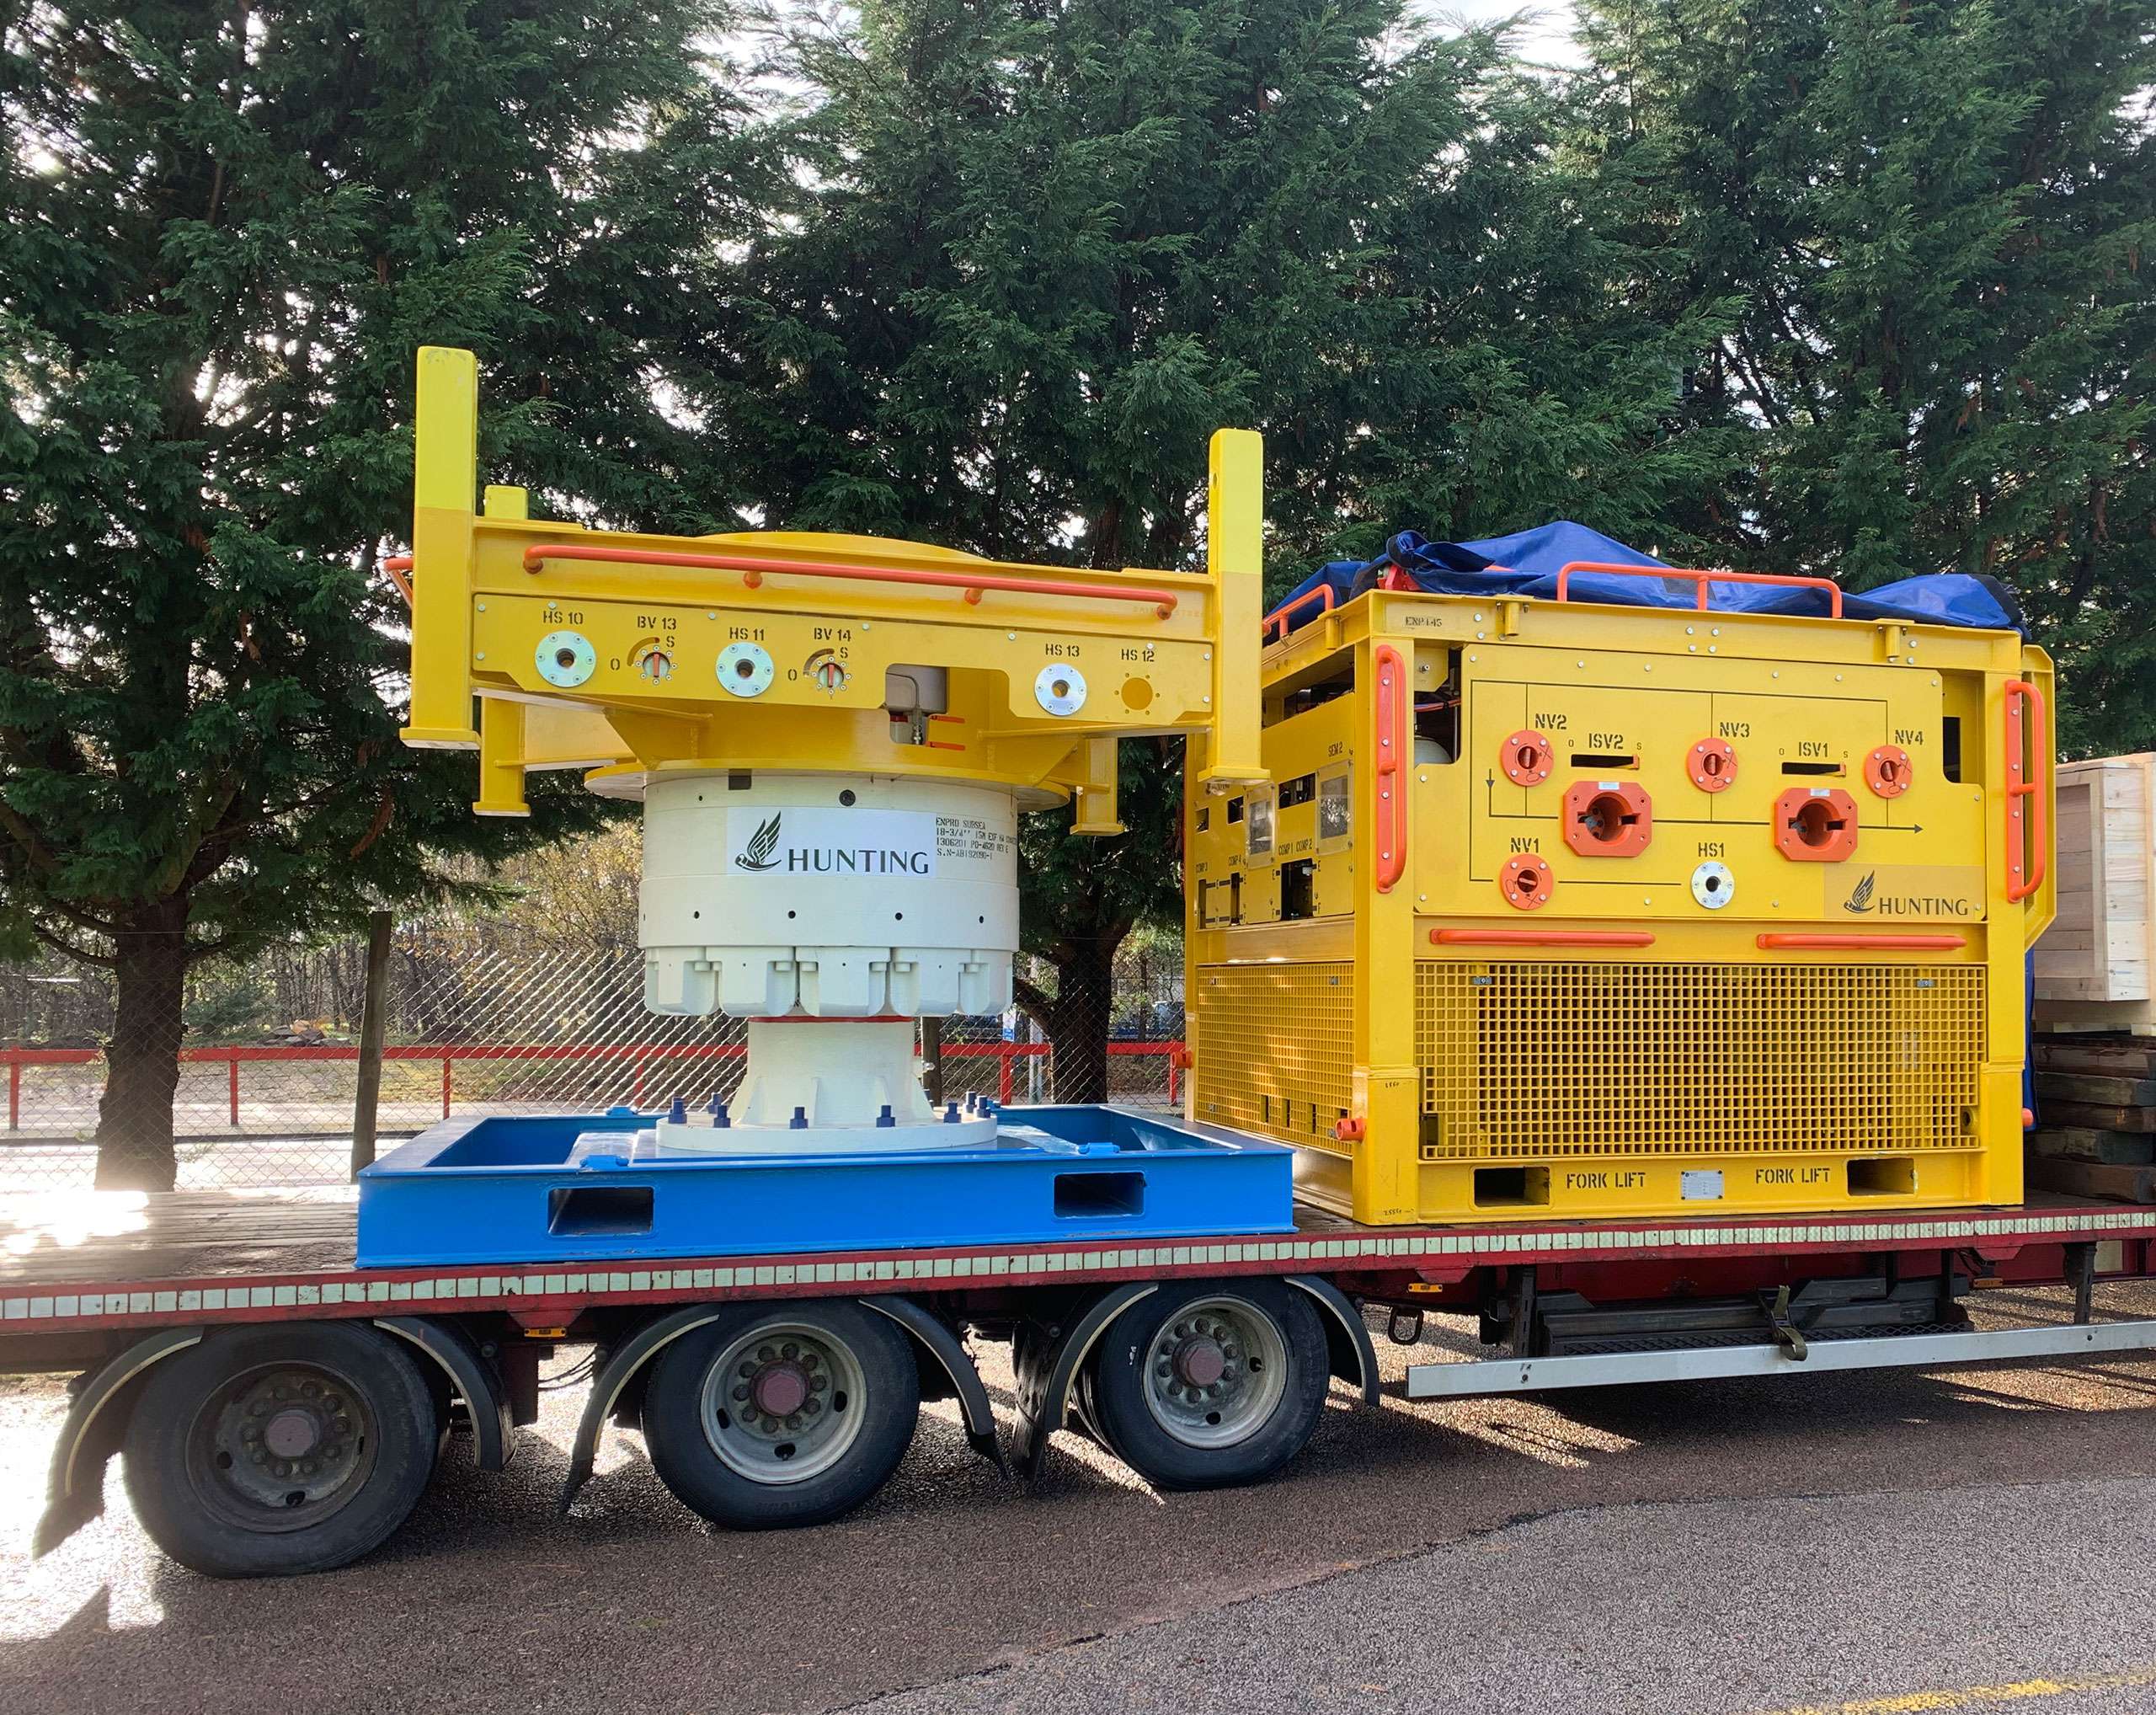 Yellow subsea equipment on back of a trailer on a road with trees in background